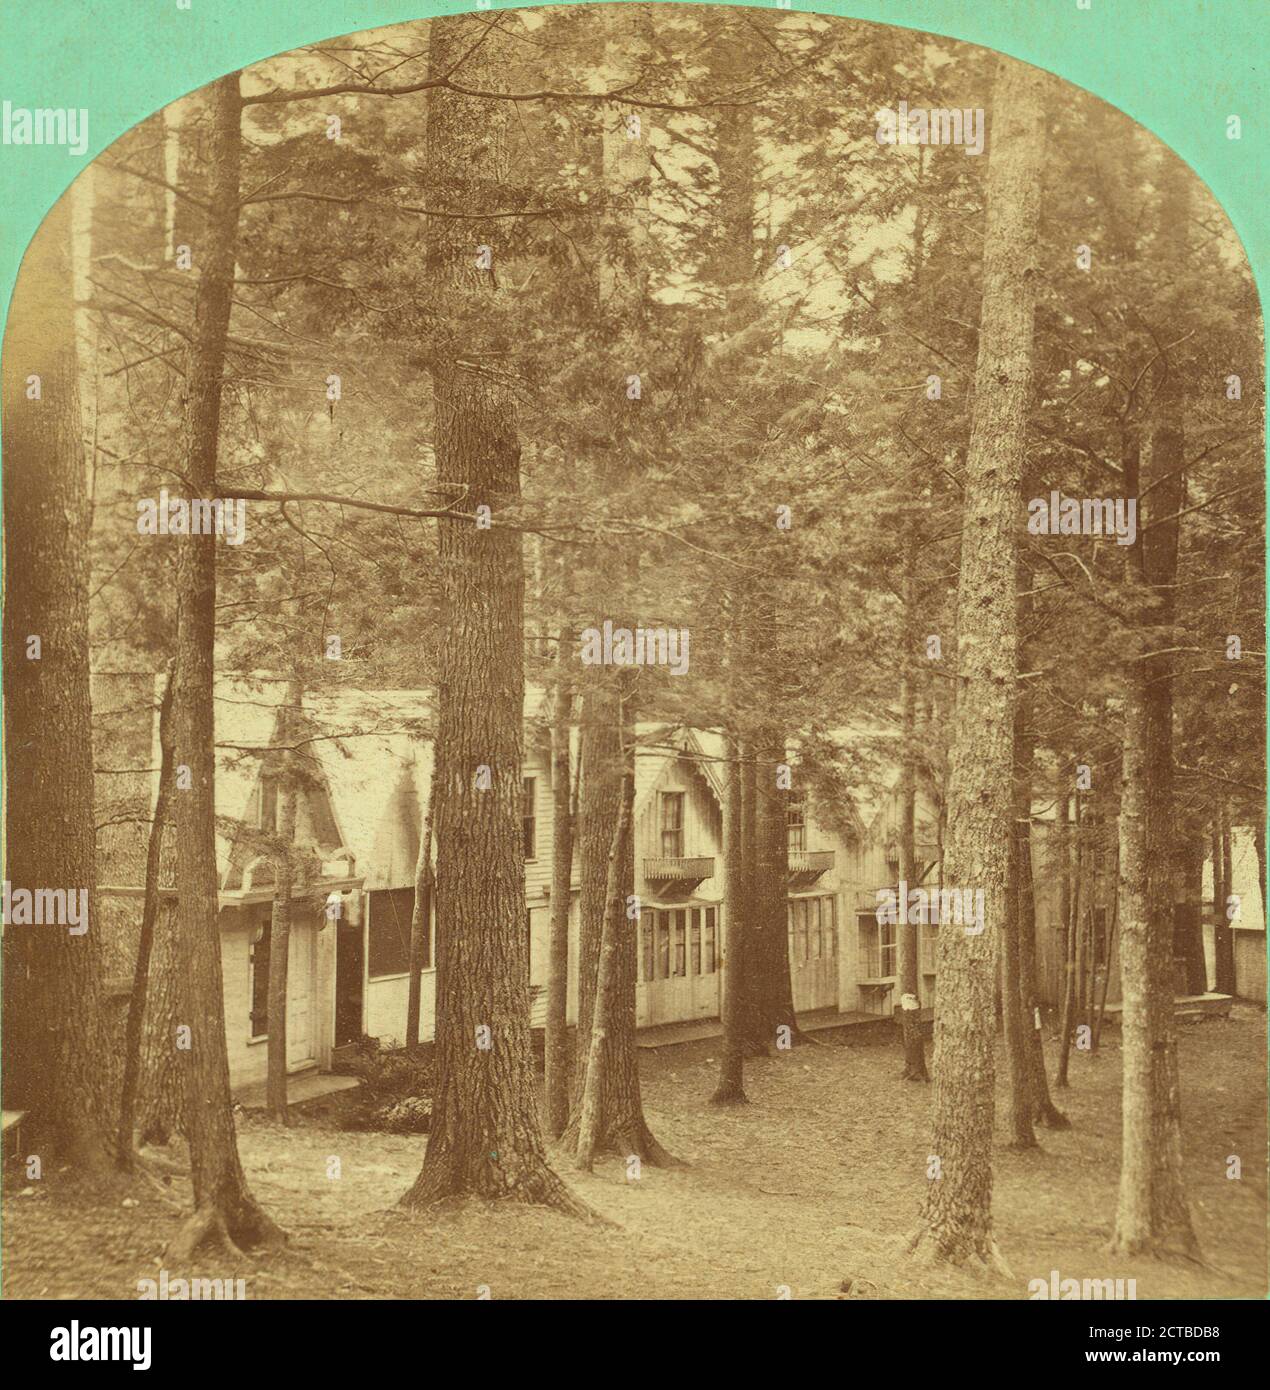 S.W. side of Circle., Copeland, O. H.(Oliver H.) (1836-1876), Camp meetings, New Hampshire, Epping (N.H Stock Photo